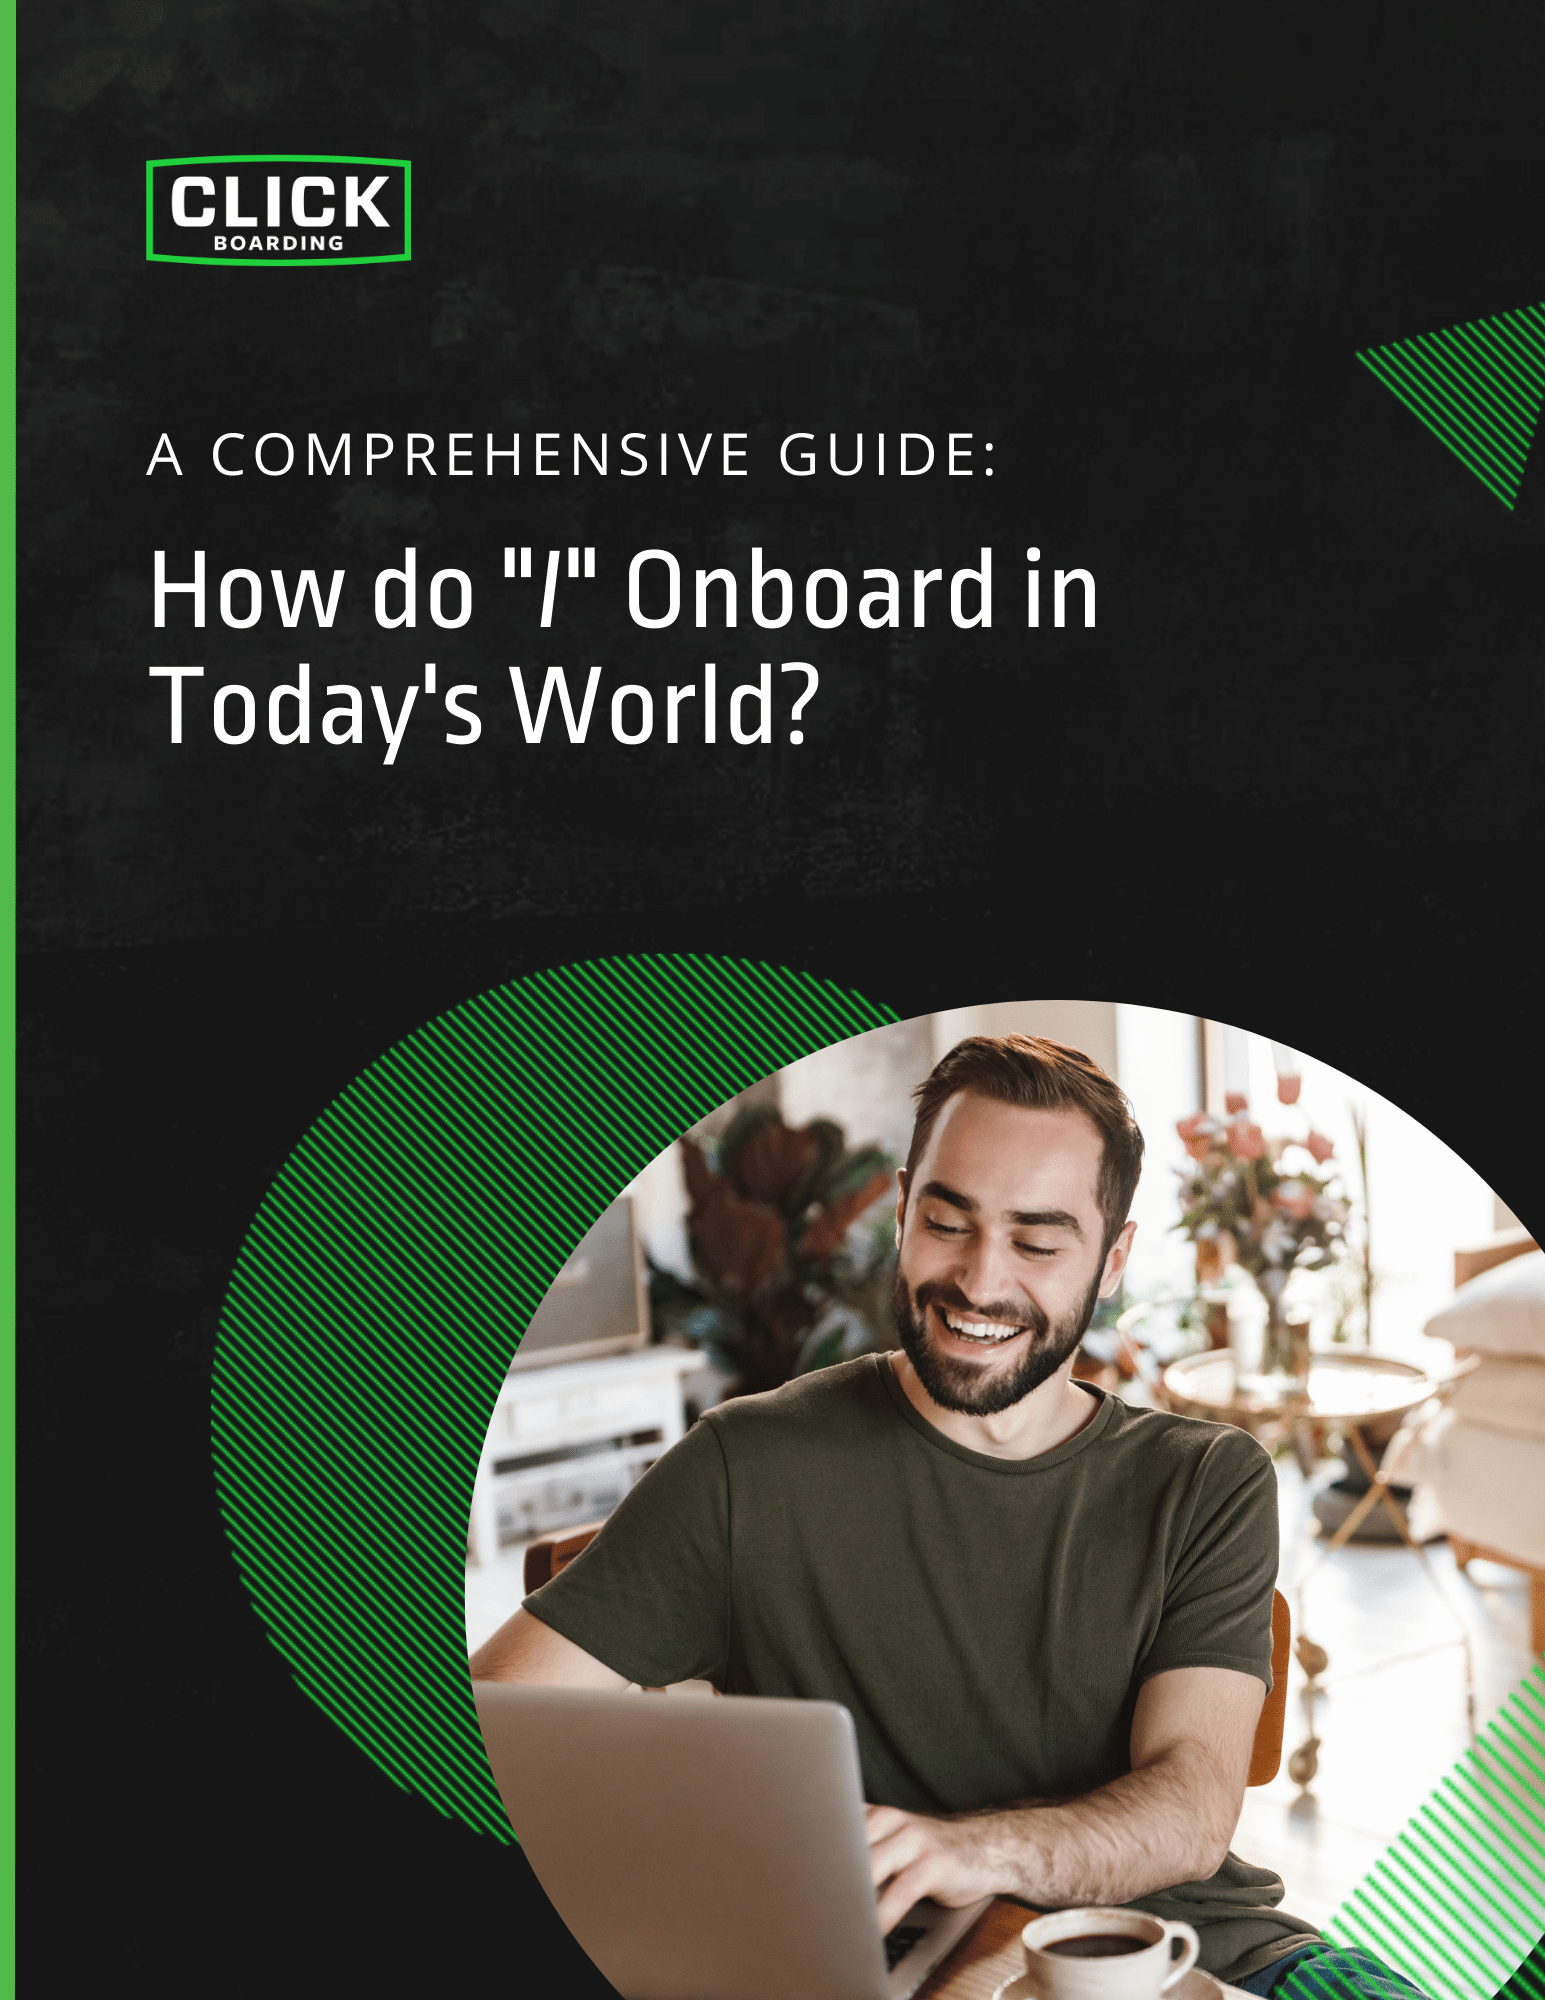 Onboarding during the pandemic: How Do "I" Onboard in Today's World?